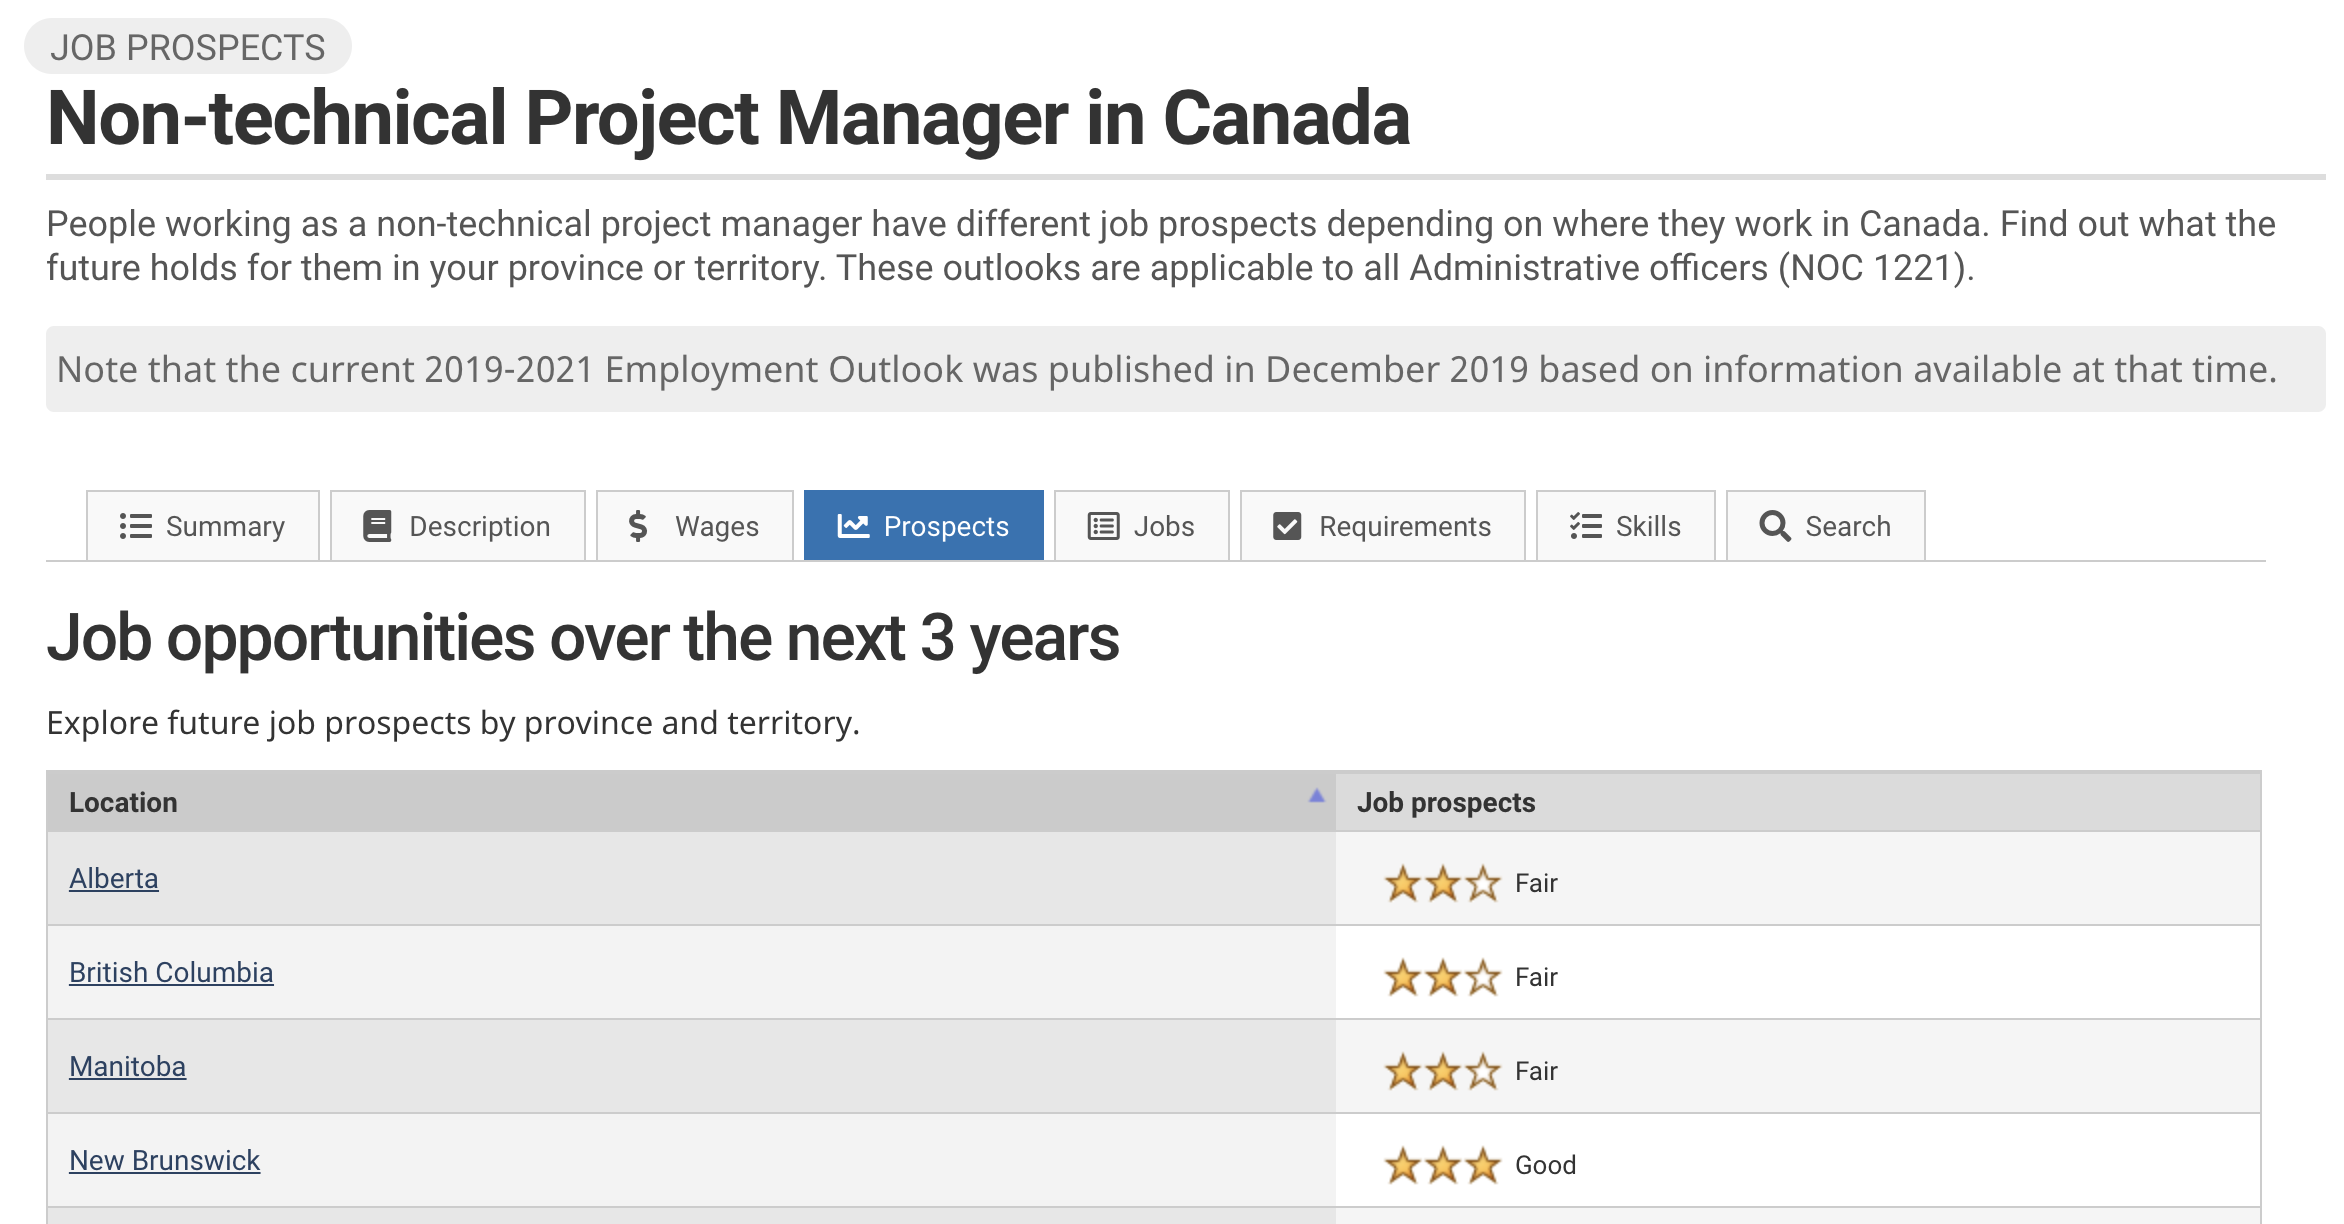 Image showing StatCan job prospects and trends for a Project Manager in Canada